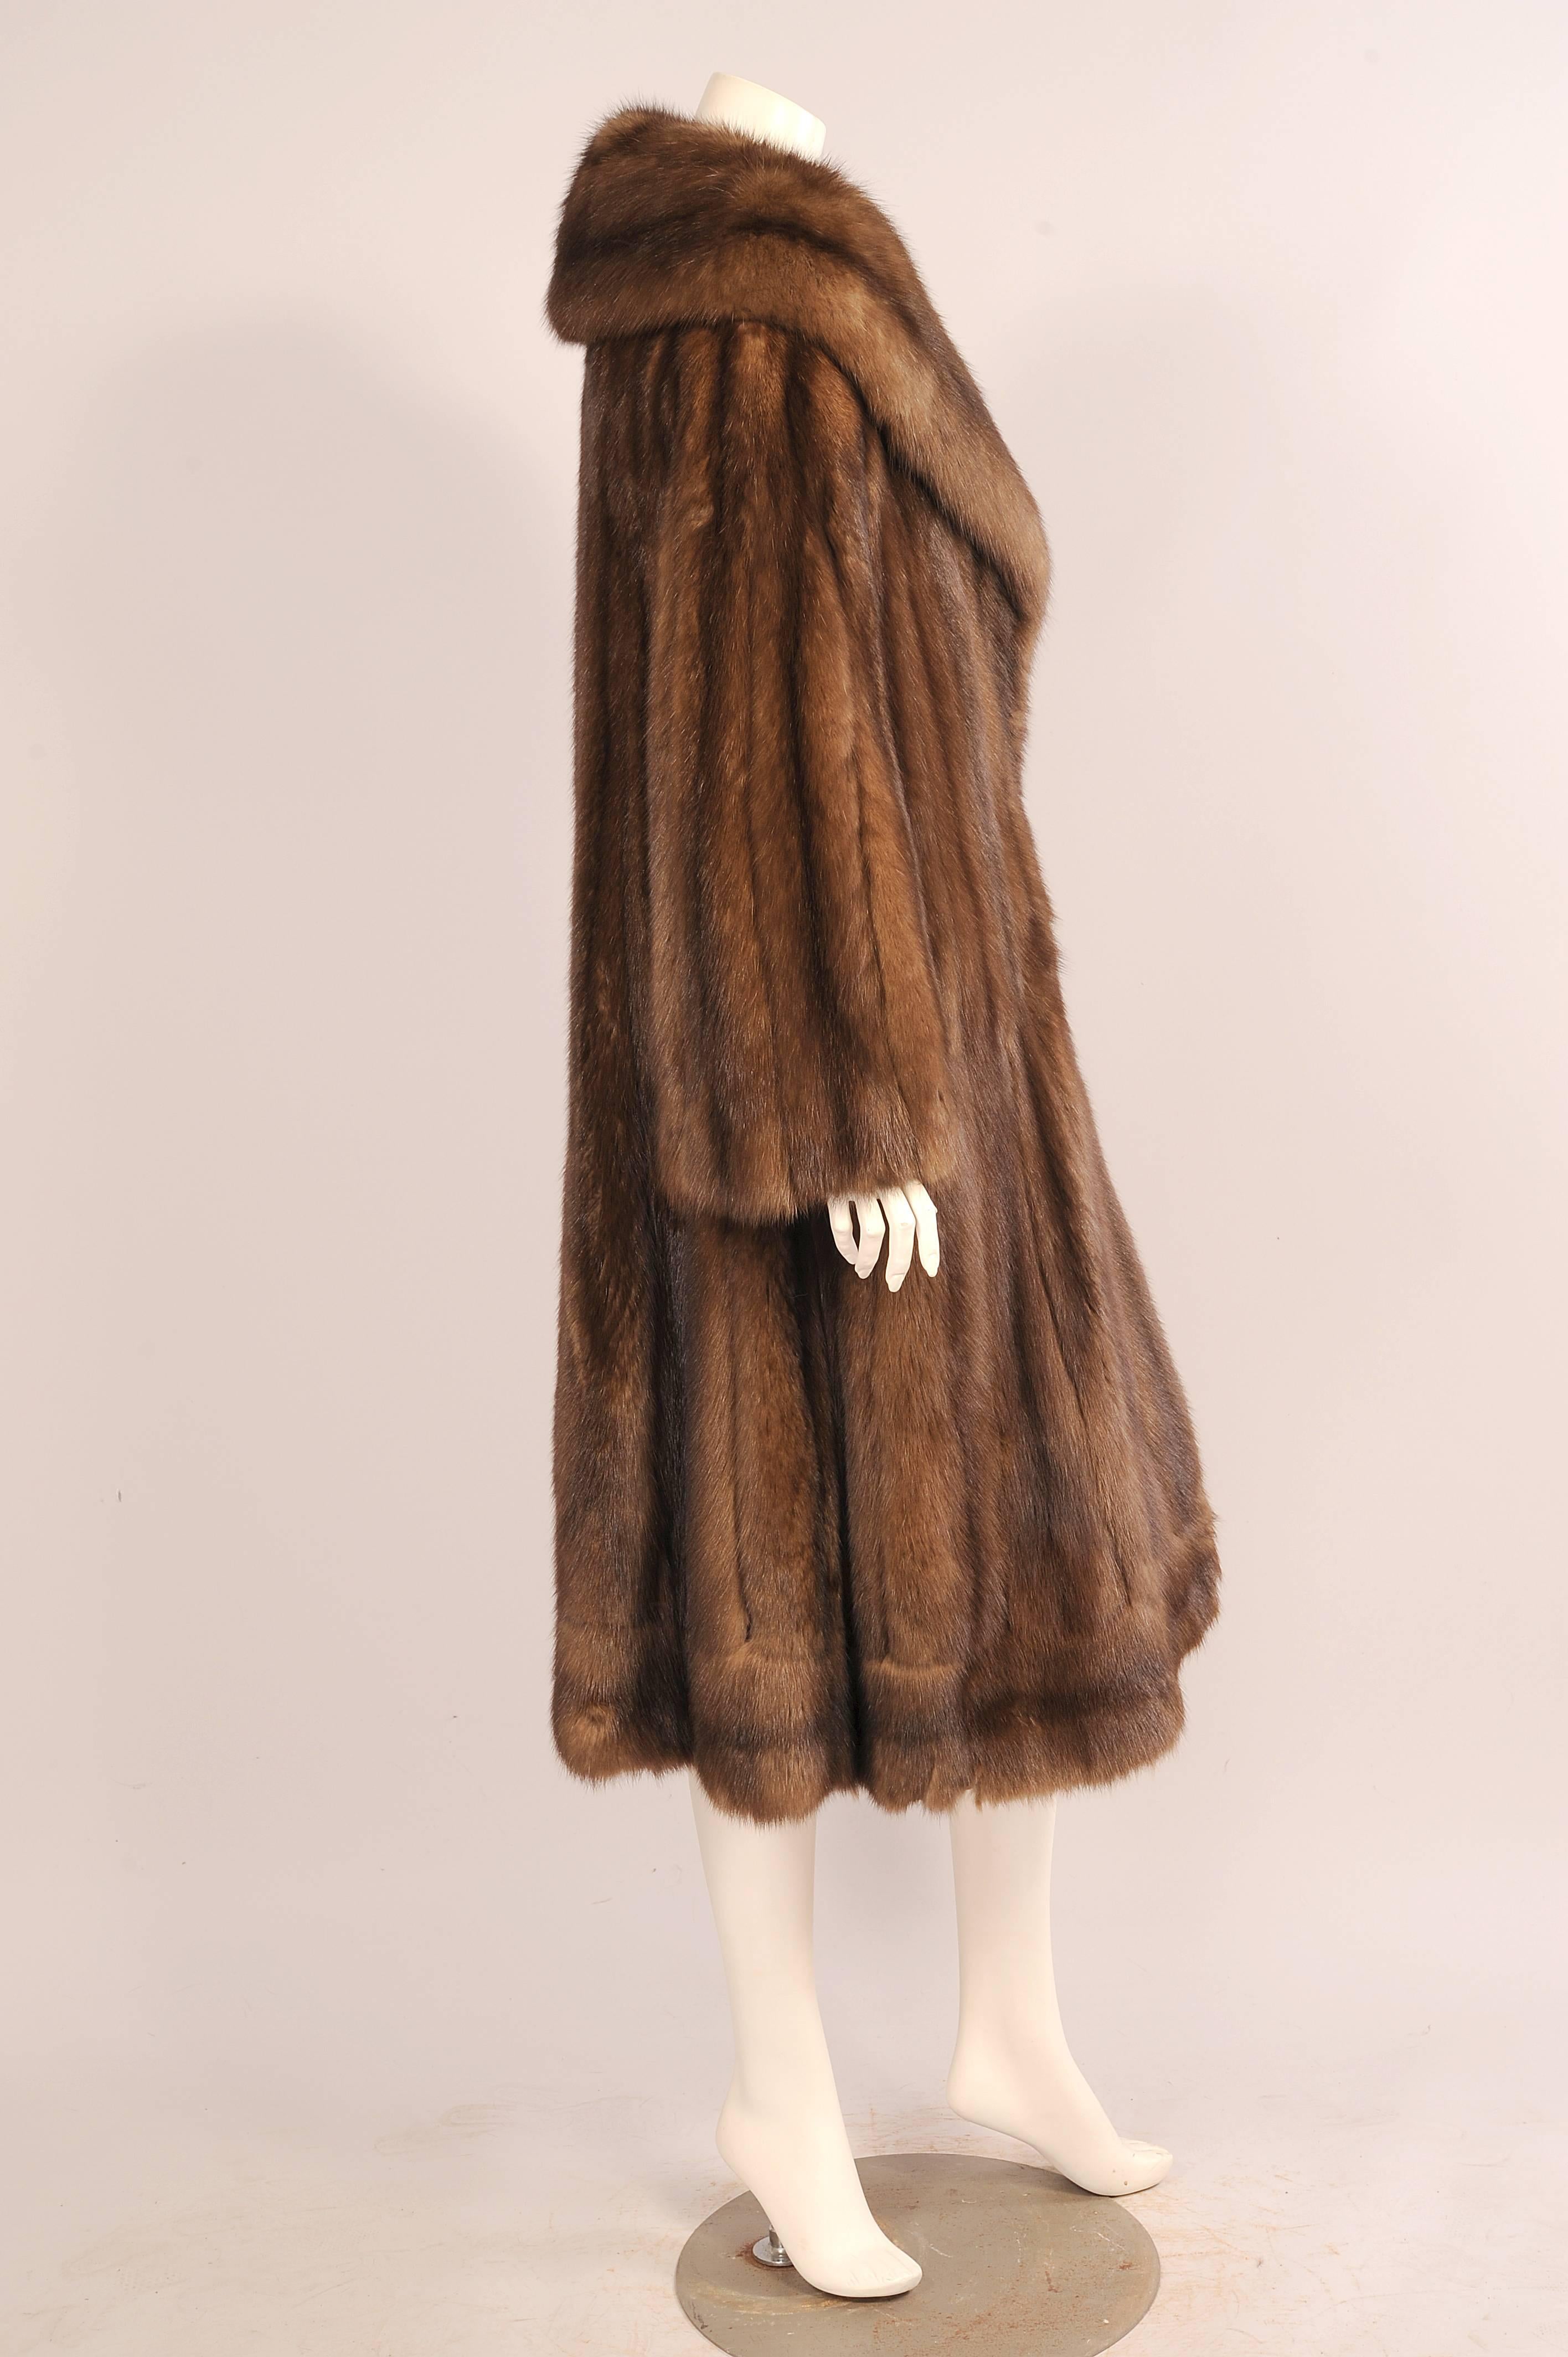 This full cut sable swing style coat with shawl collar does not skimp on sable pelts. Retailed by Dallas, Texas
furrier John Tauben this luxurious coat has a generous full cut with lots of movement. The face framing collar is balanced by the